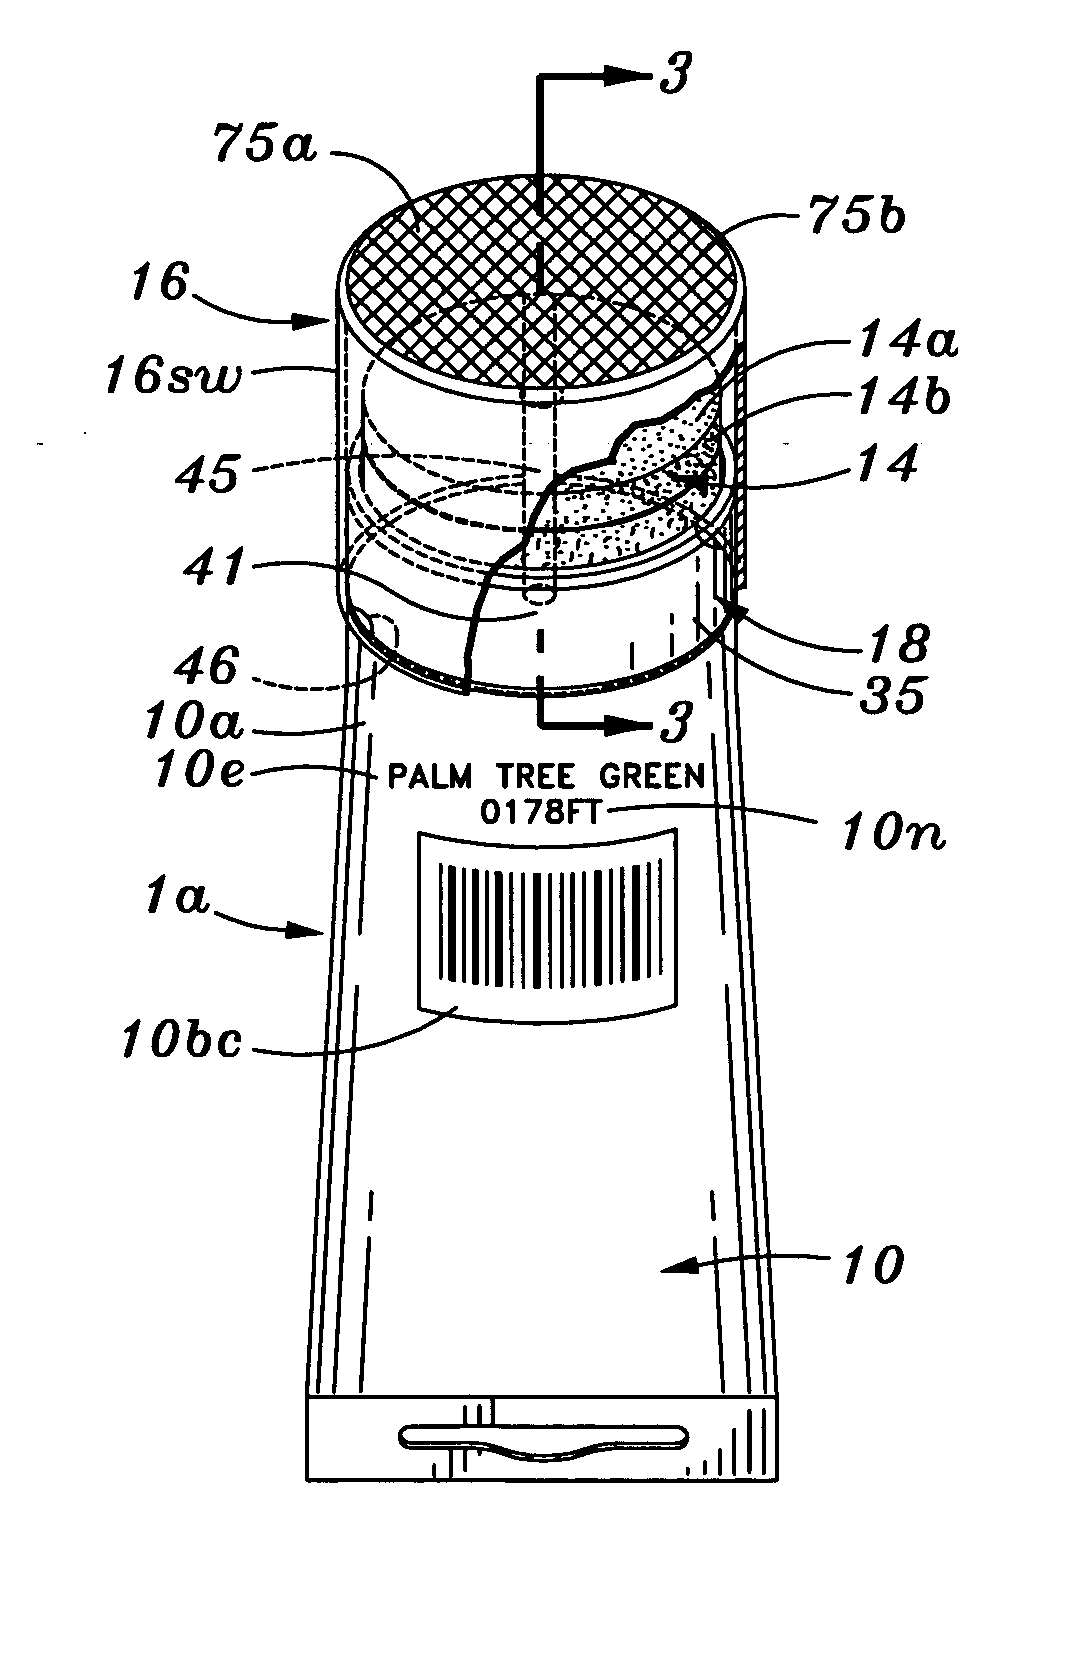 Twist-open dispenser with applicator & method of applying skin care products & method of merchandising paint